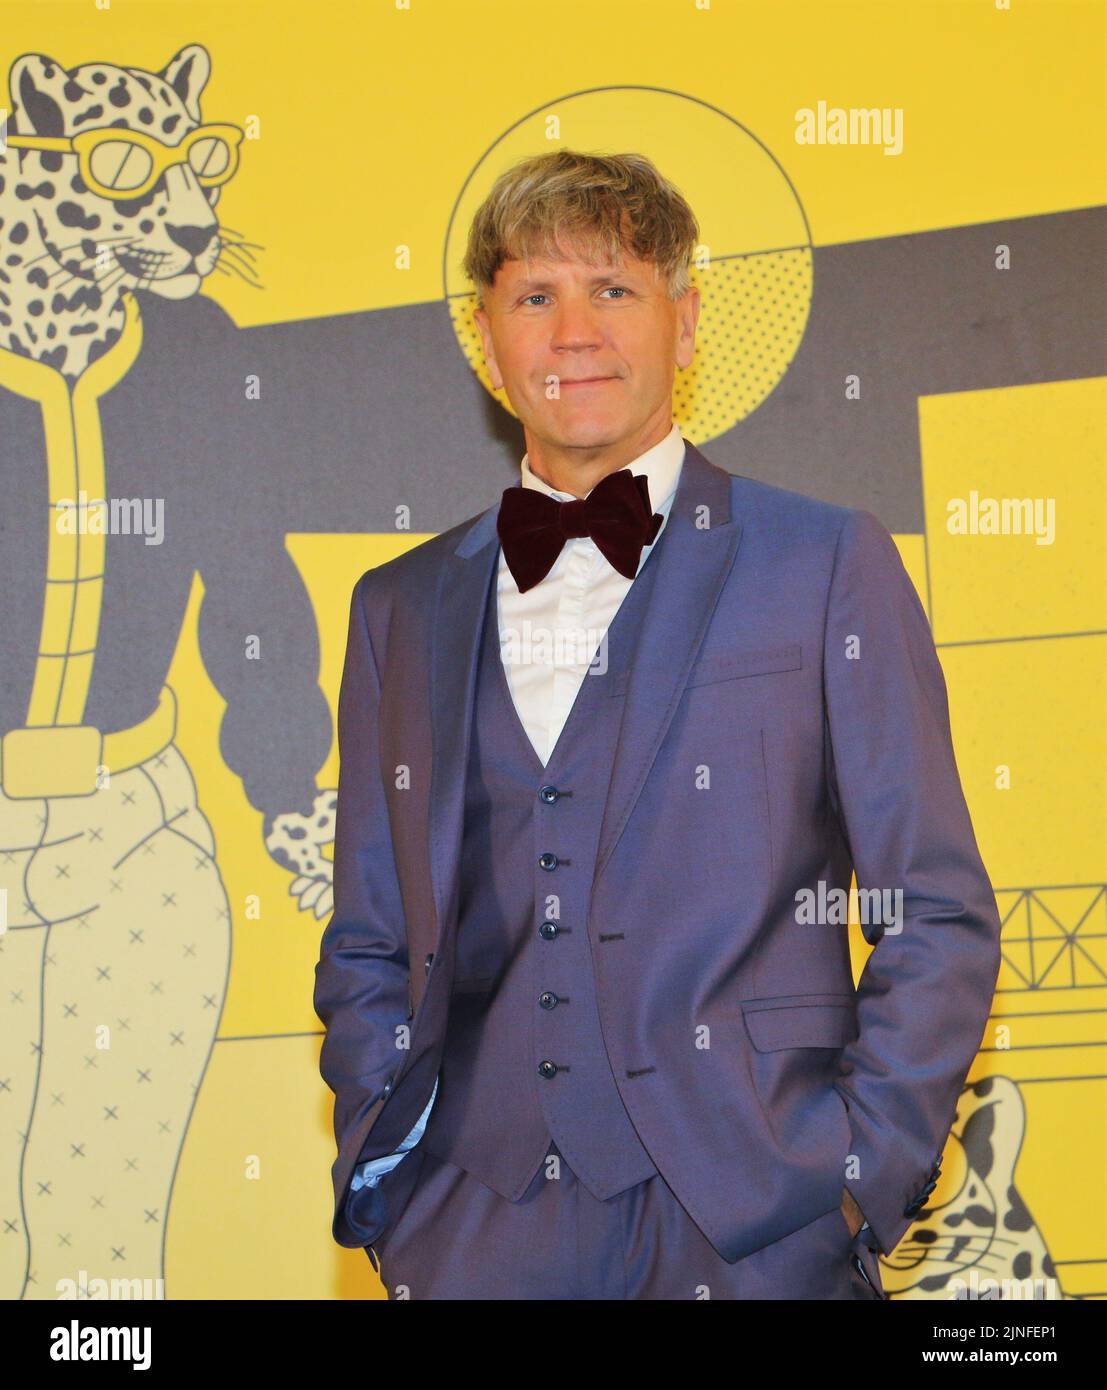 Locarno, Switzerland. 11th Aug, 2022. Locarno, Swiss Locarno Film Festival 2022 PIAFFE photocall film cast, producer In the photo: Biorn Melhus actor Credit: Independent Photo Agency/Alamy Live News Stock Photo